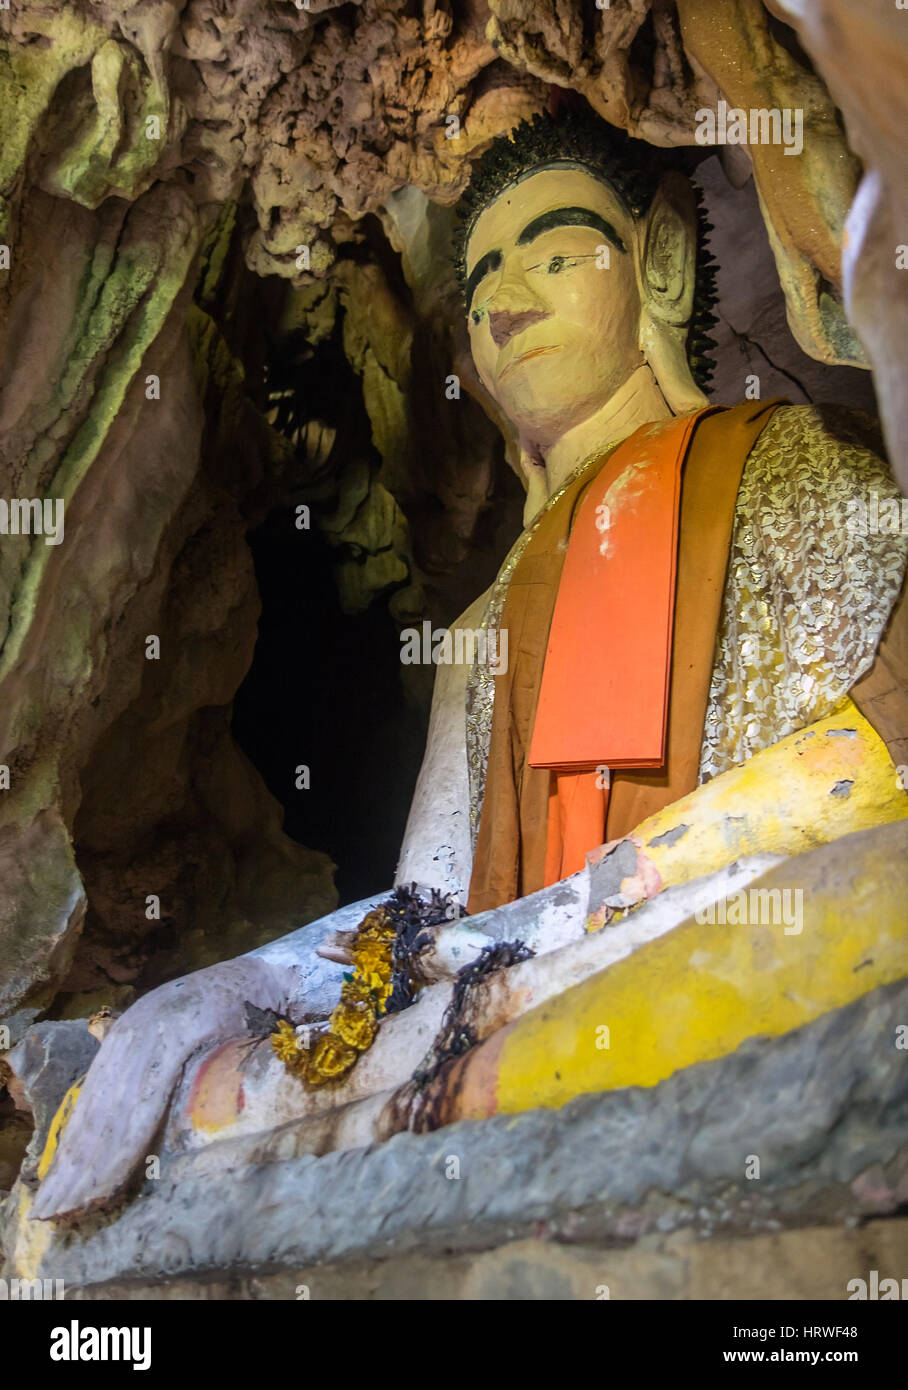 Buddha statue sitting in a cave. Dressed Statue of Buddha sitting in meditation posture, Laos. Stock Photo